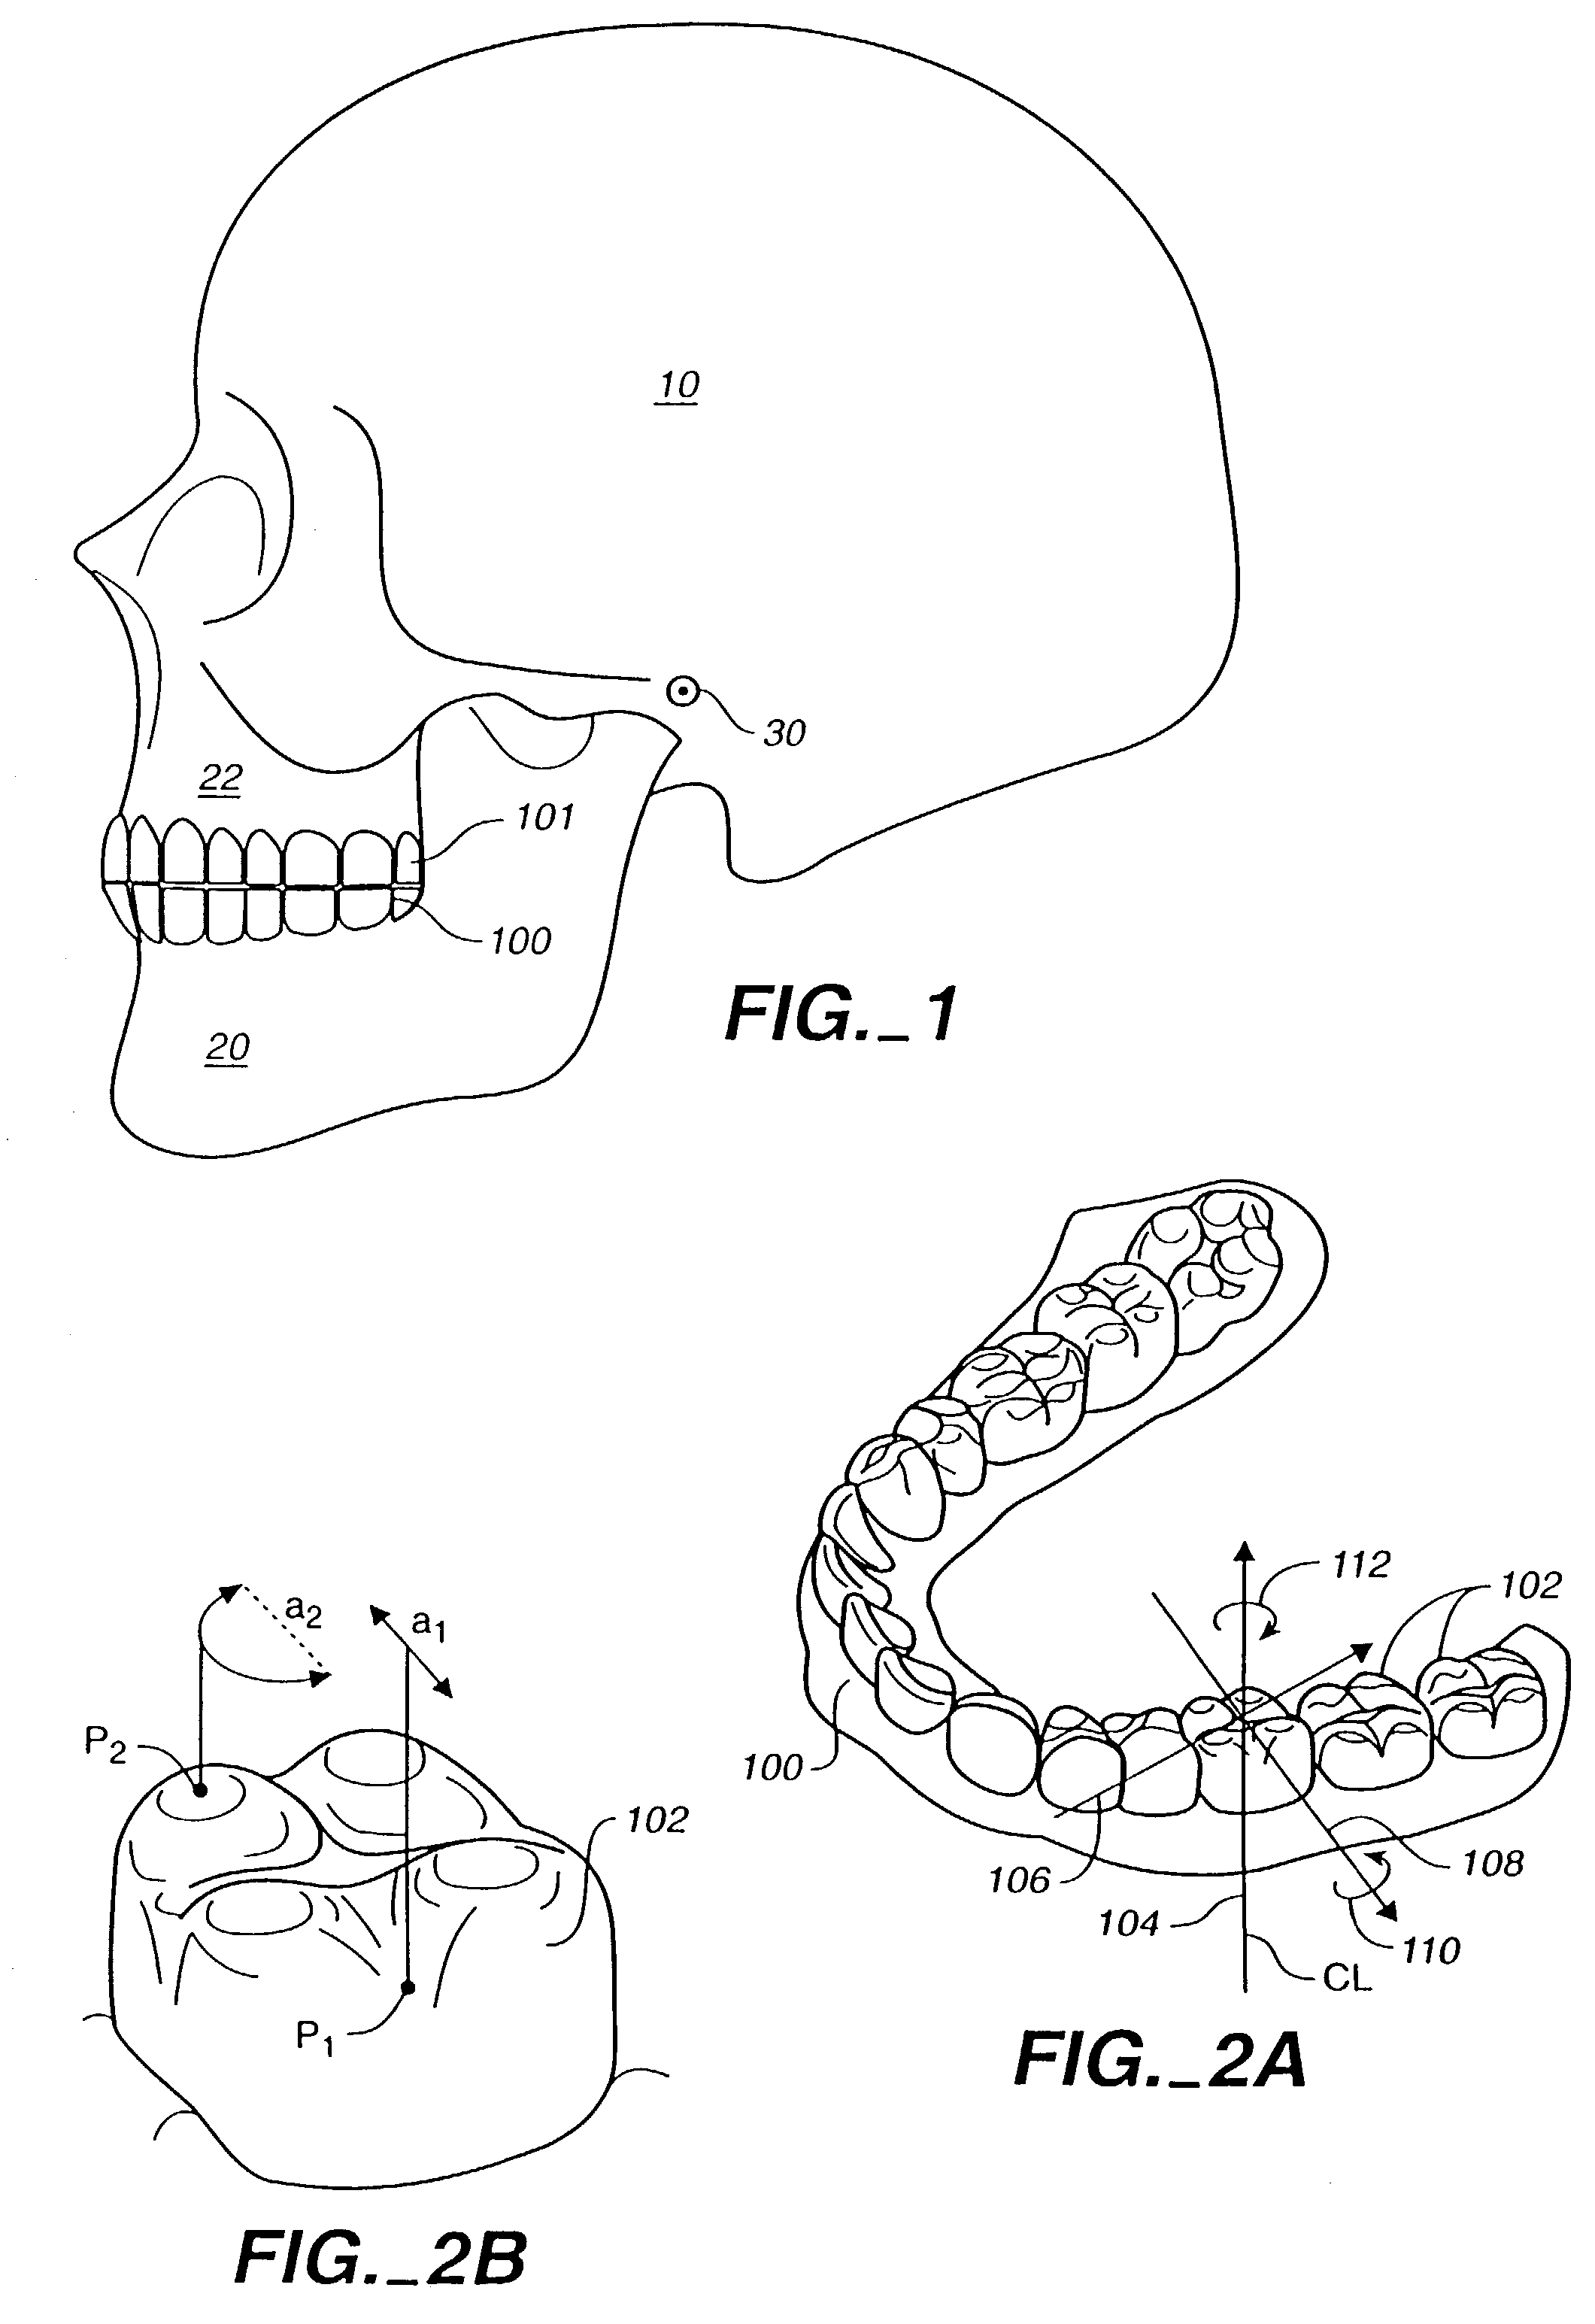 System for determining final position of teeth